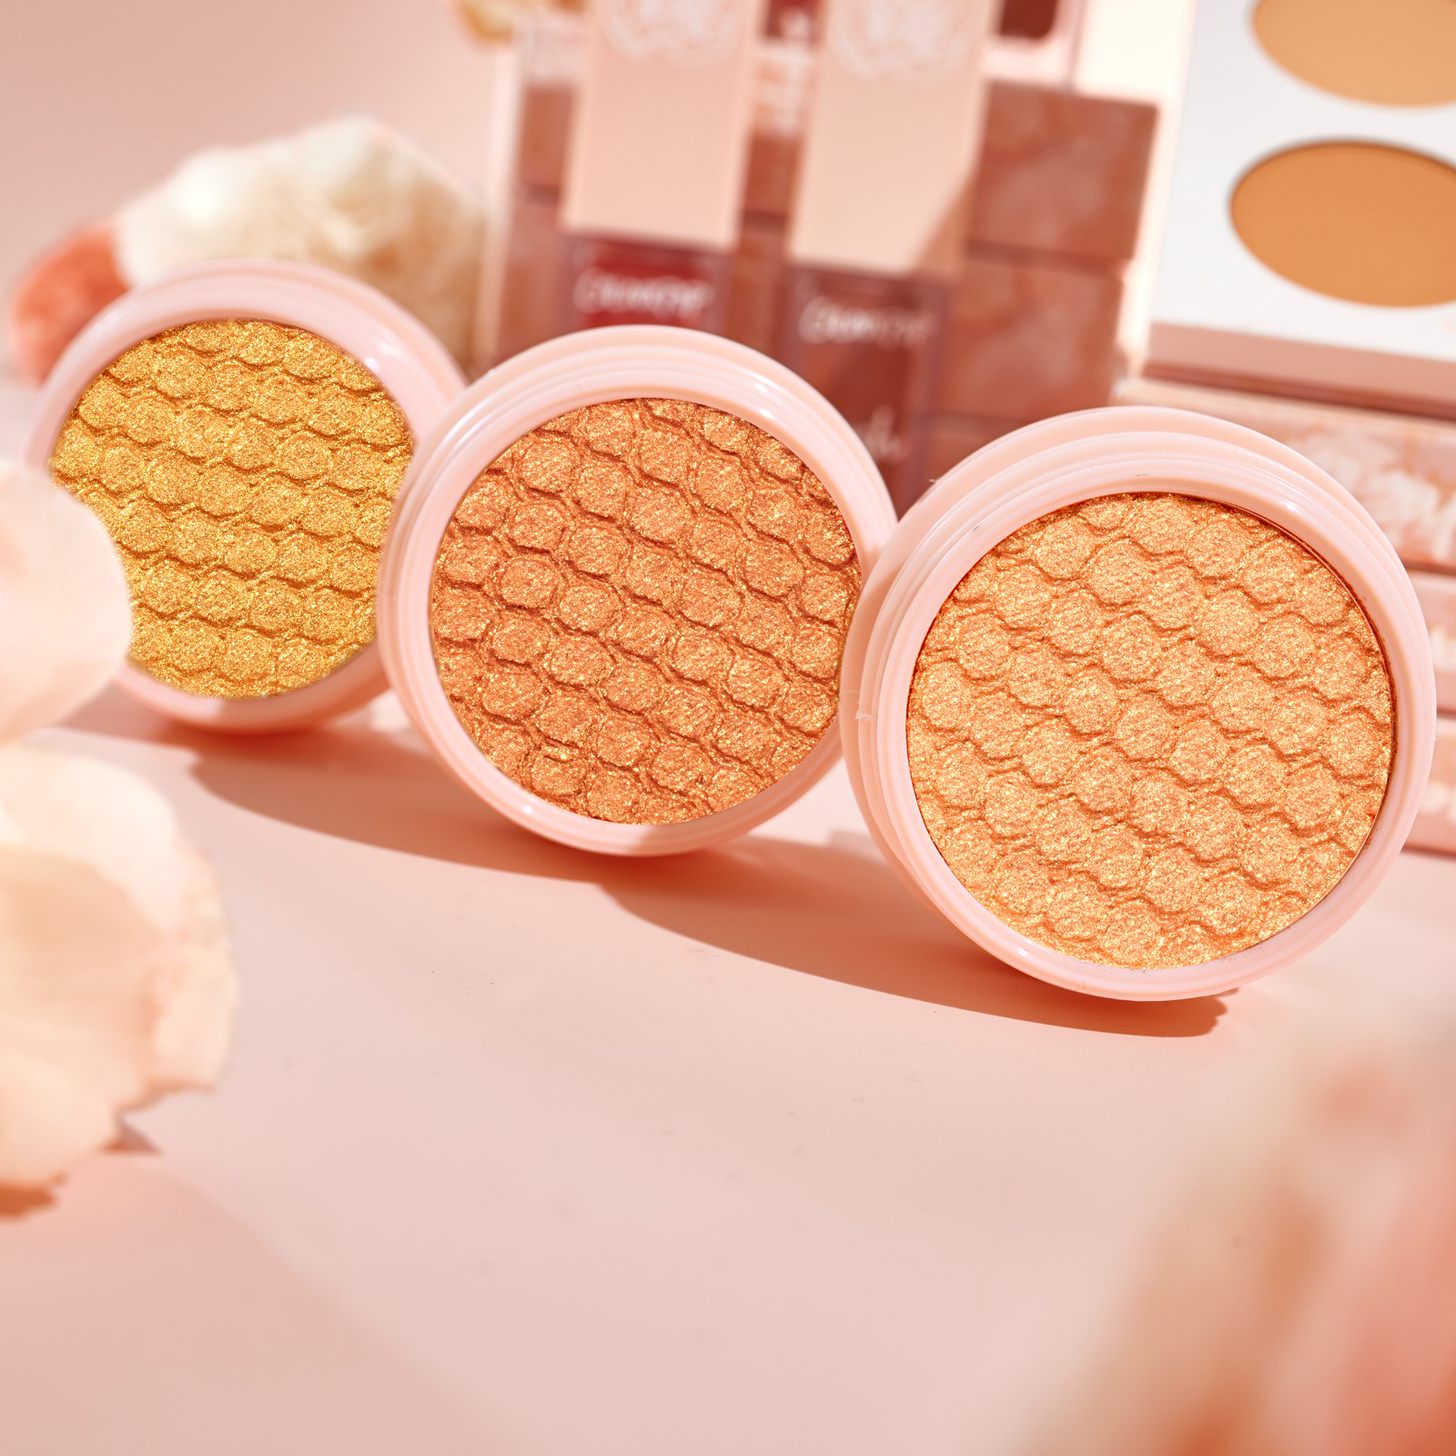 ColourPop’s New ‘Apricot Me Not’ Collection Is Perfect For Any Soft Glam Look